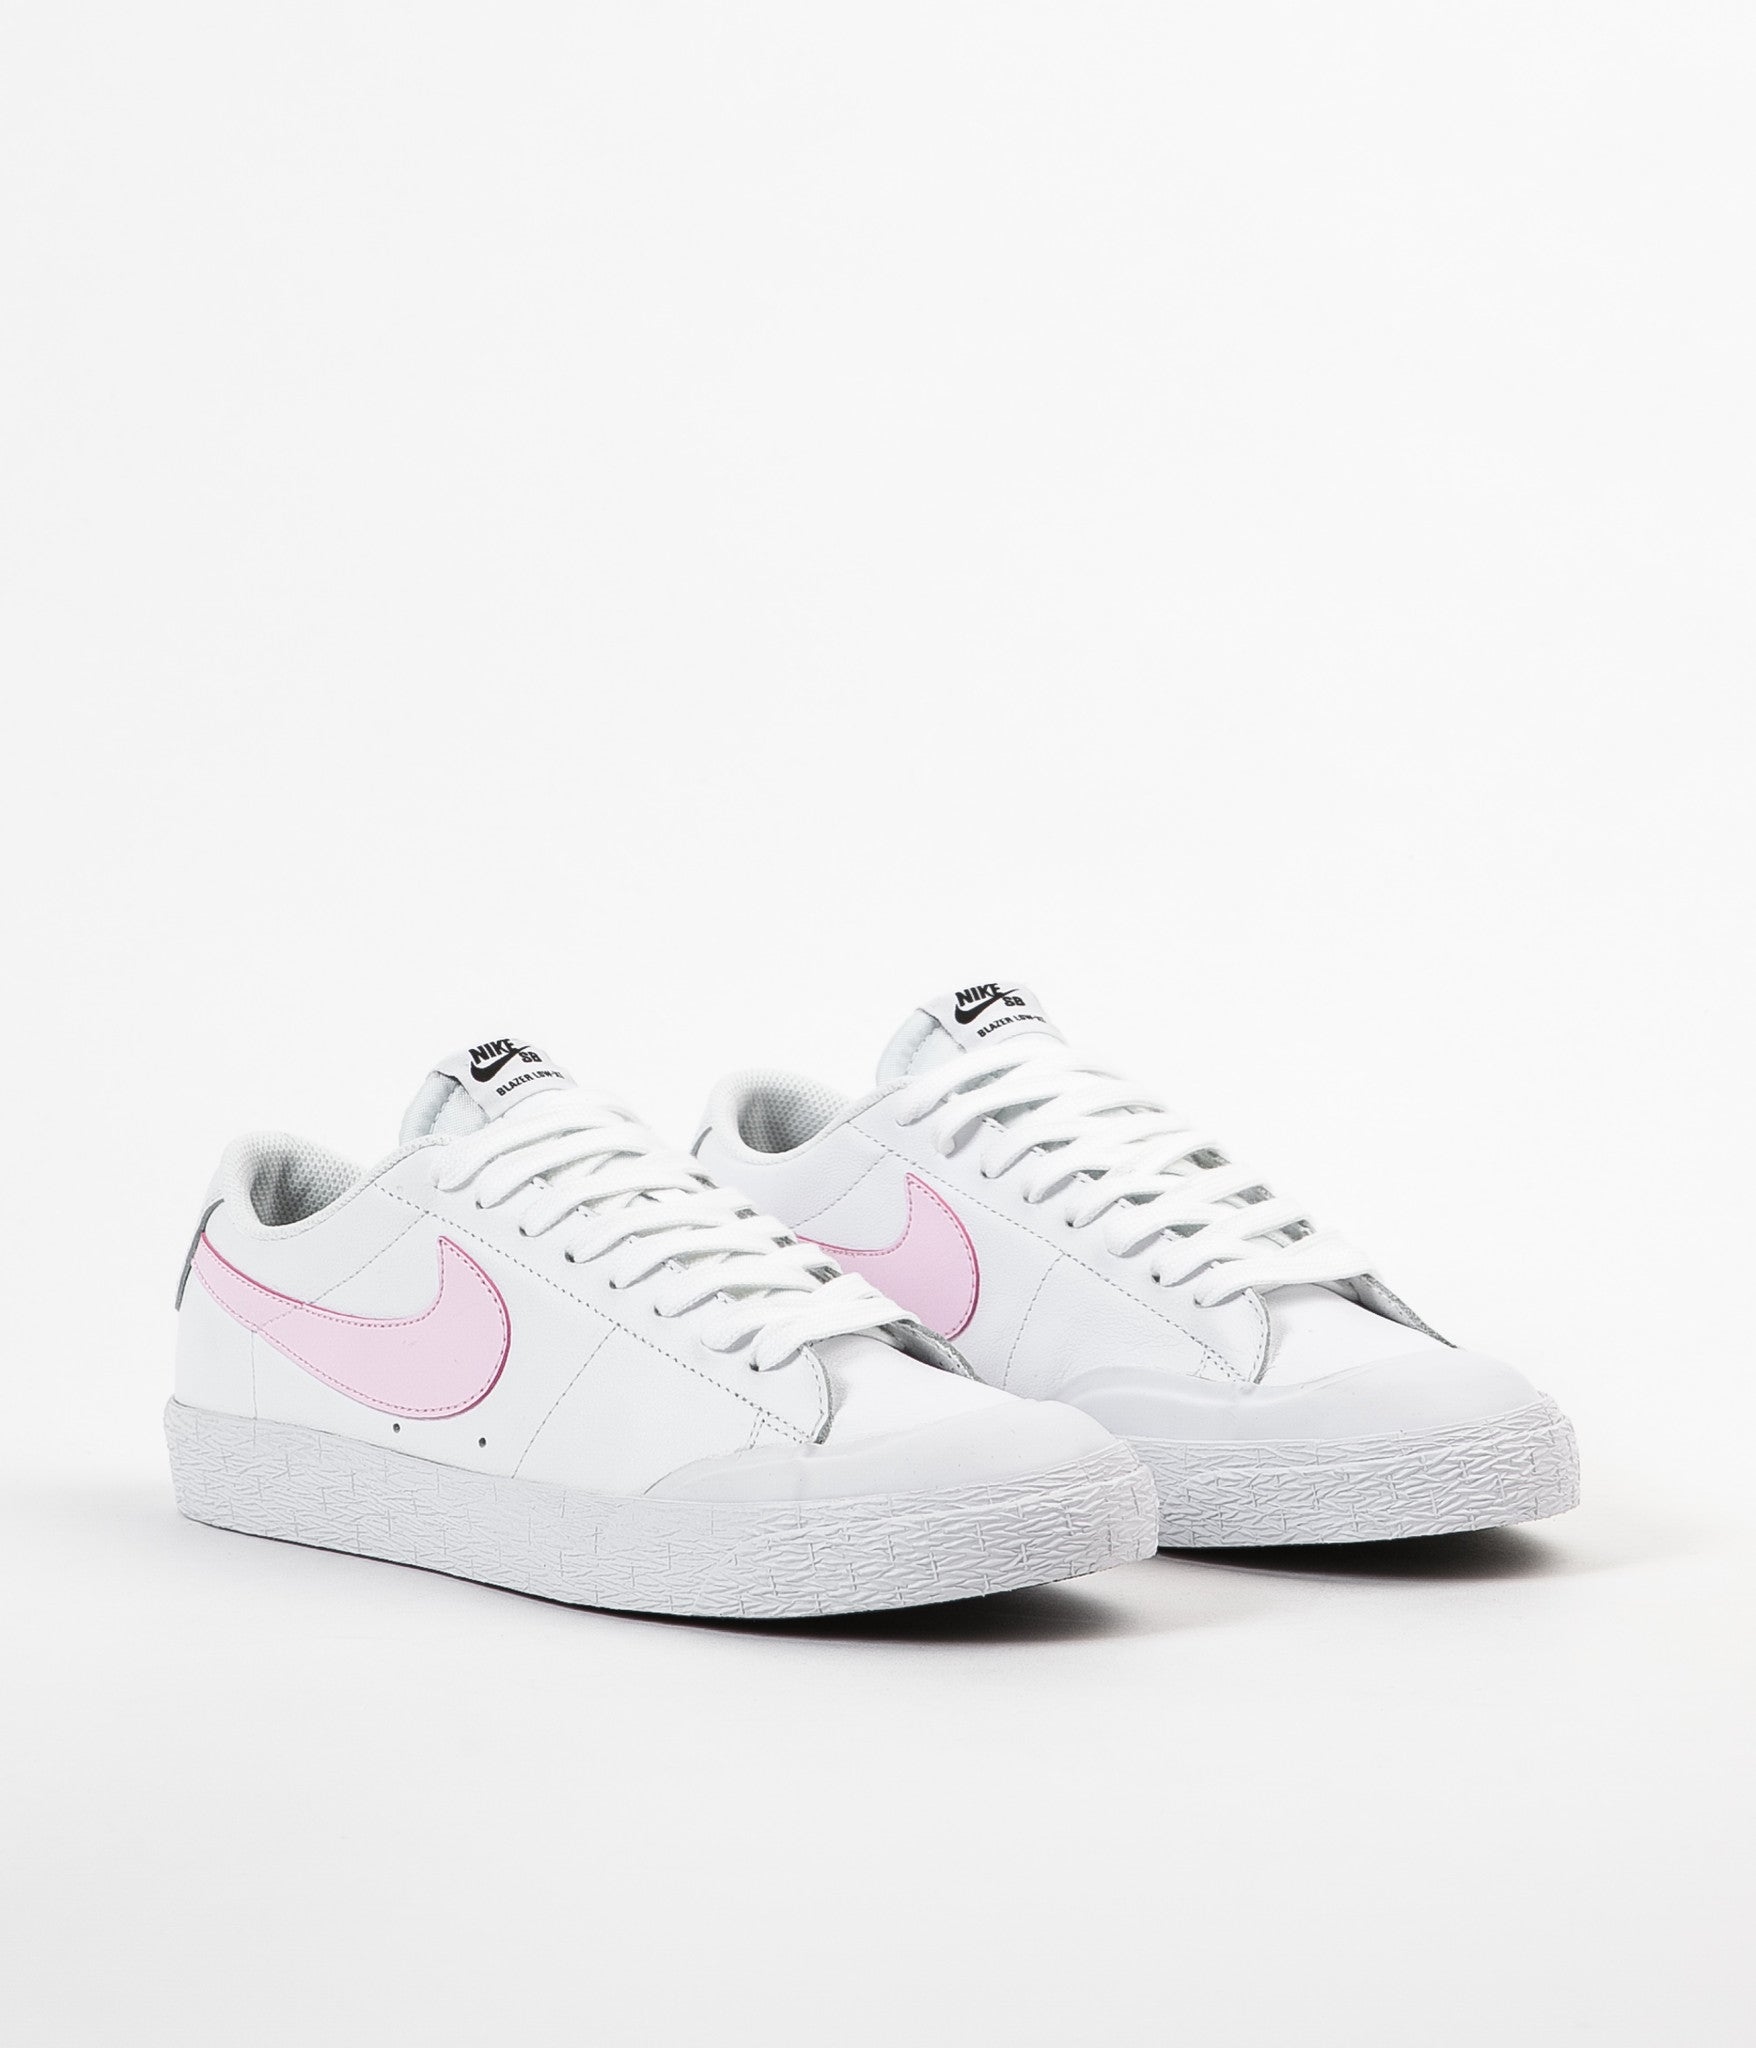 nike shoes white and pink